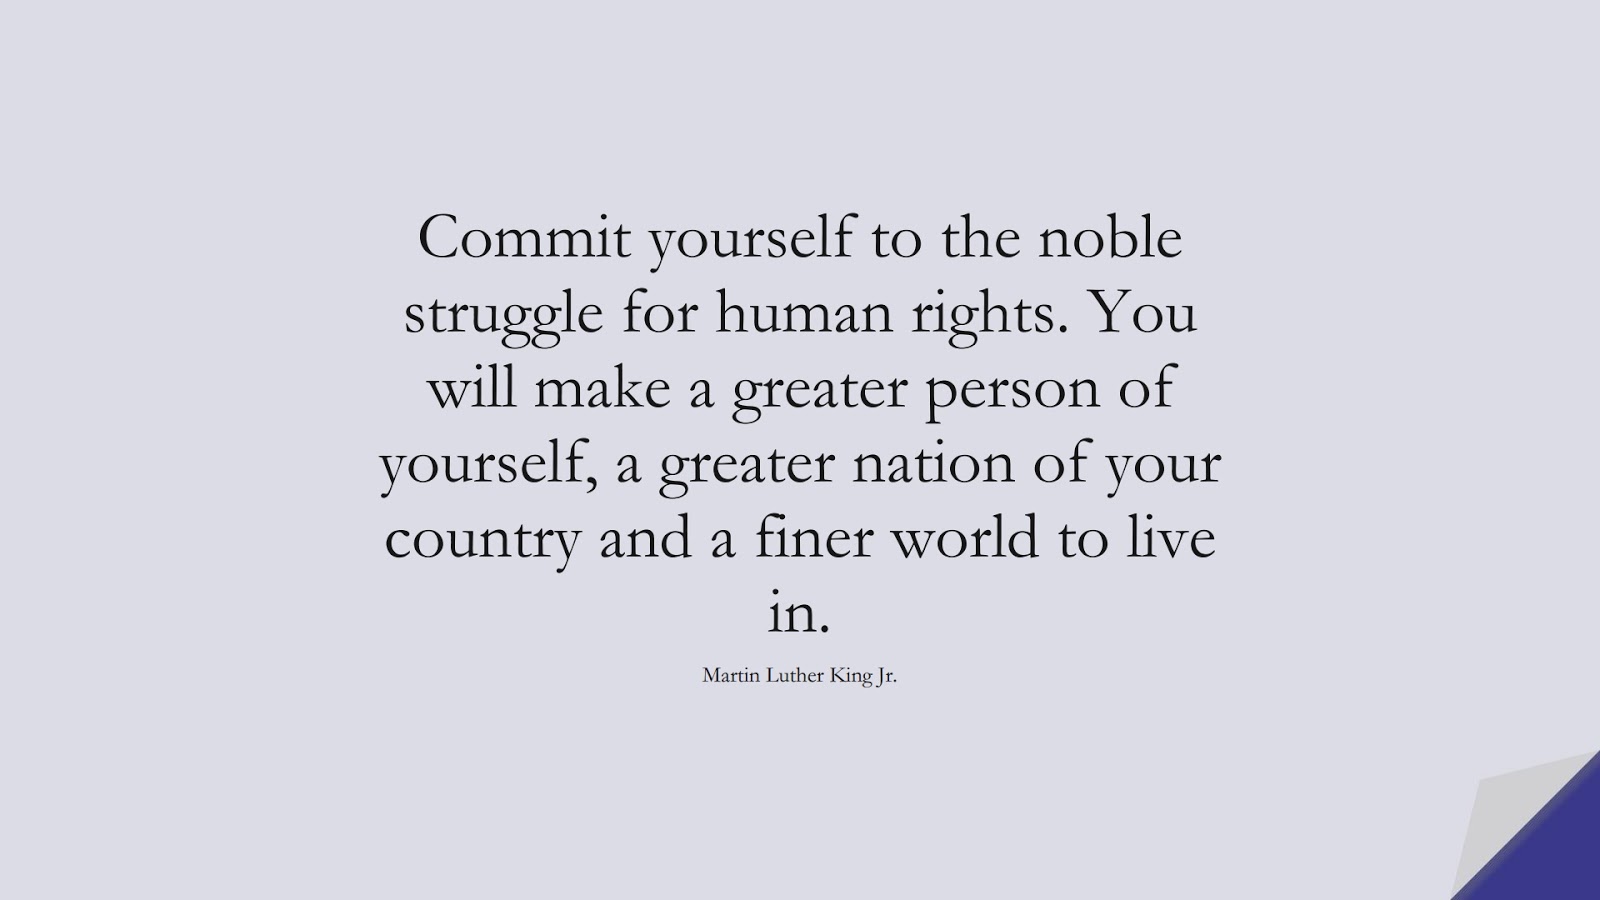 Commit yourself to the noble struggle for human rights. You will make a greater person of yourself, a greater nation of your country and a finer world to live in. (Martin Luther King Jr.);  #MartinLutherKingJrQuotes